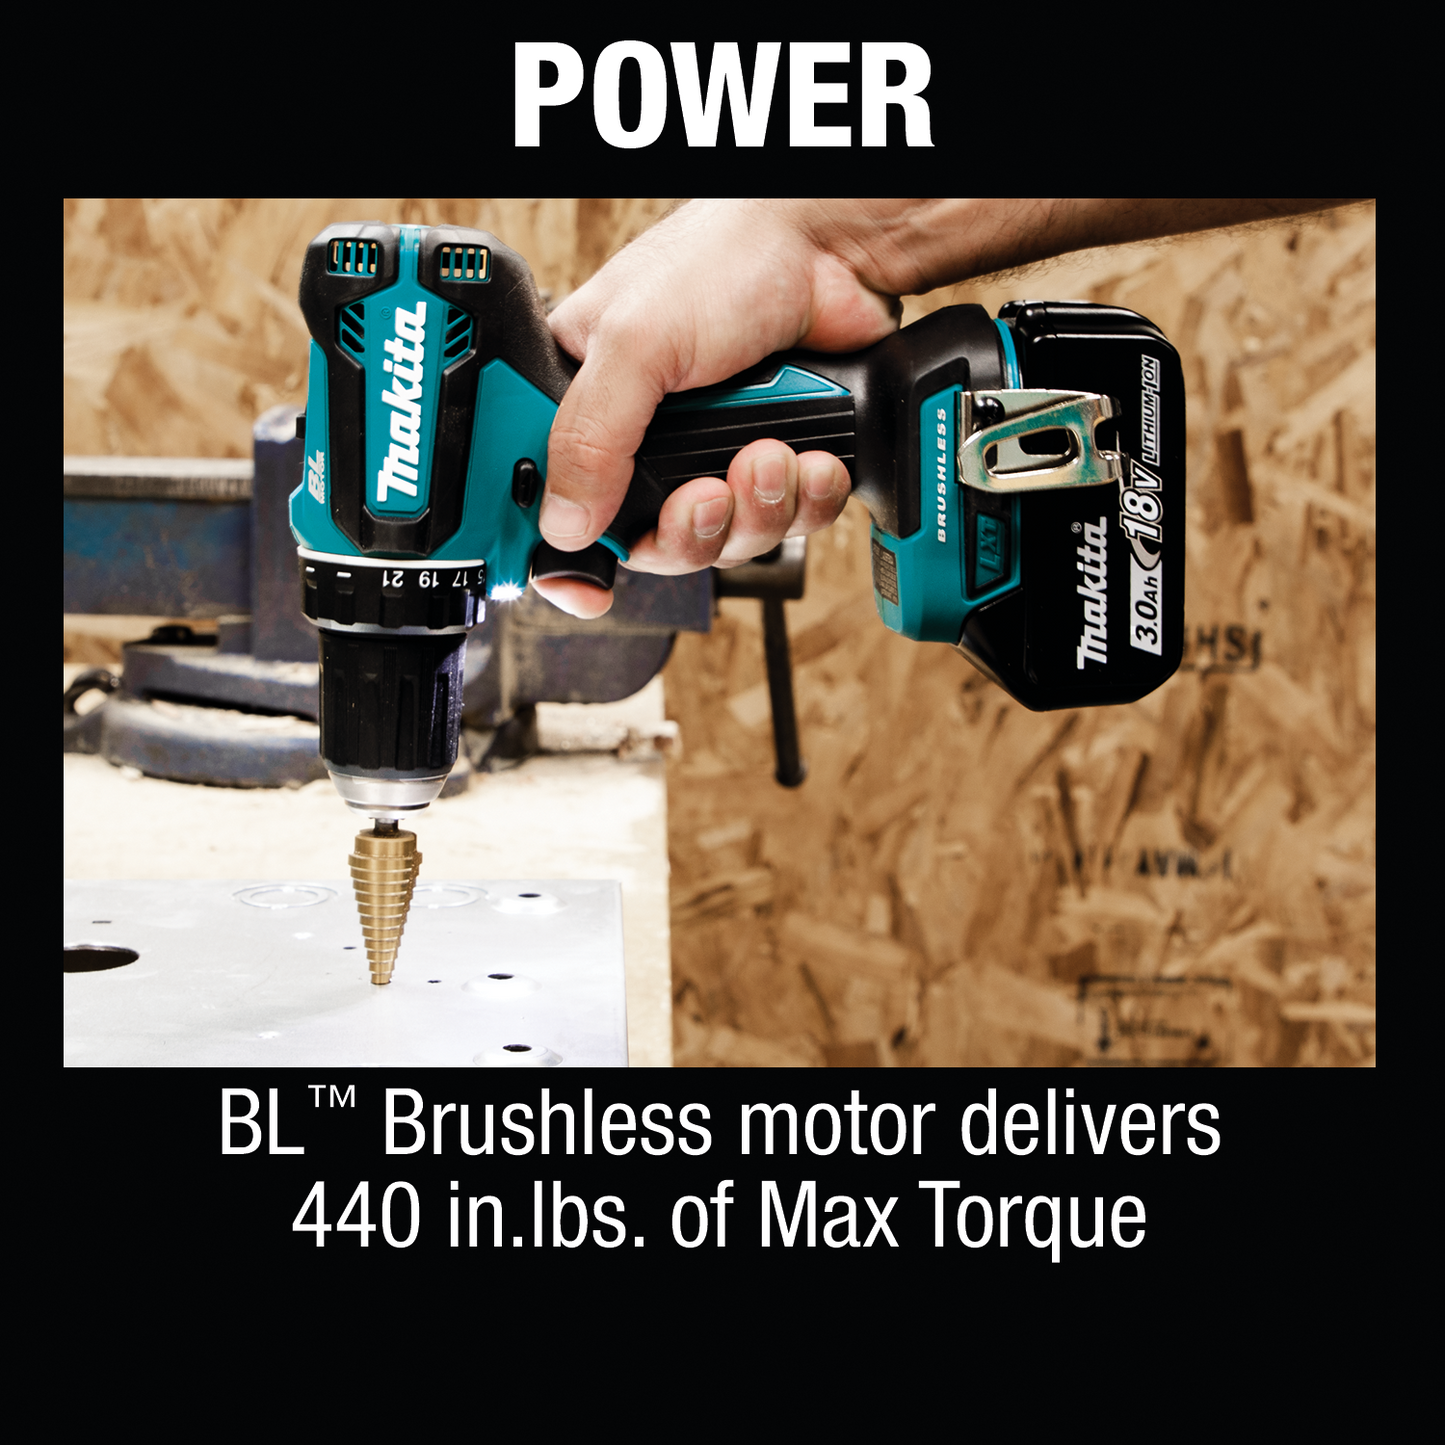 Makita 18 Volt LXT Lithium Ion Brushless Cordless 1/2 Inch Driver Drill Kit Factory Serviced